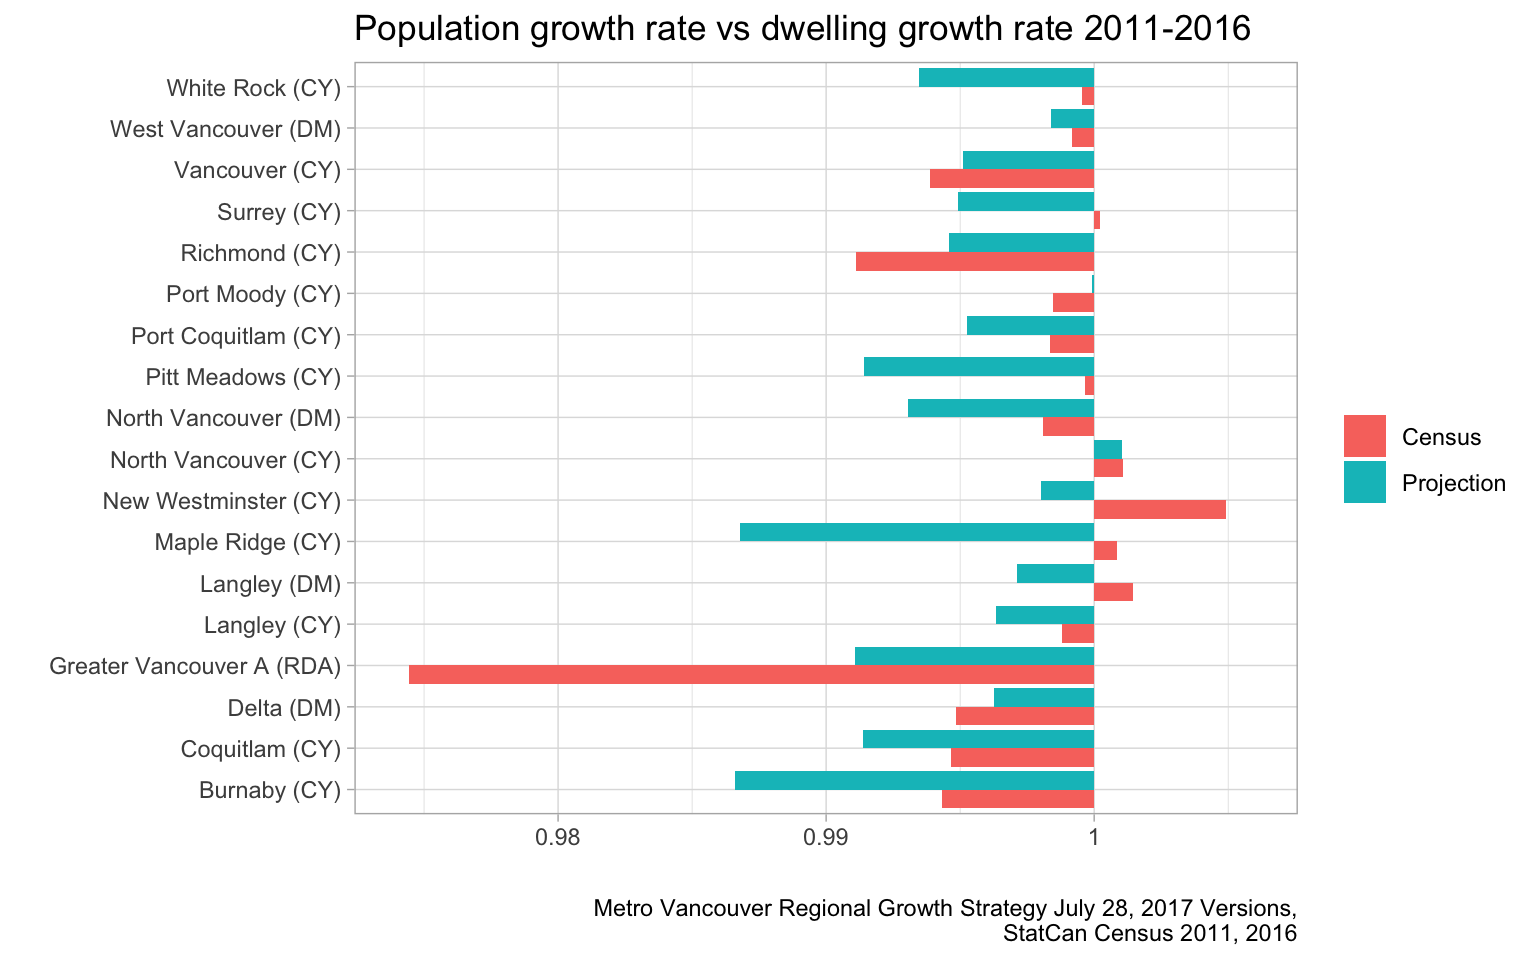 On Vancouver population projections